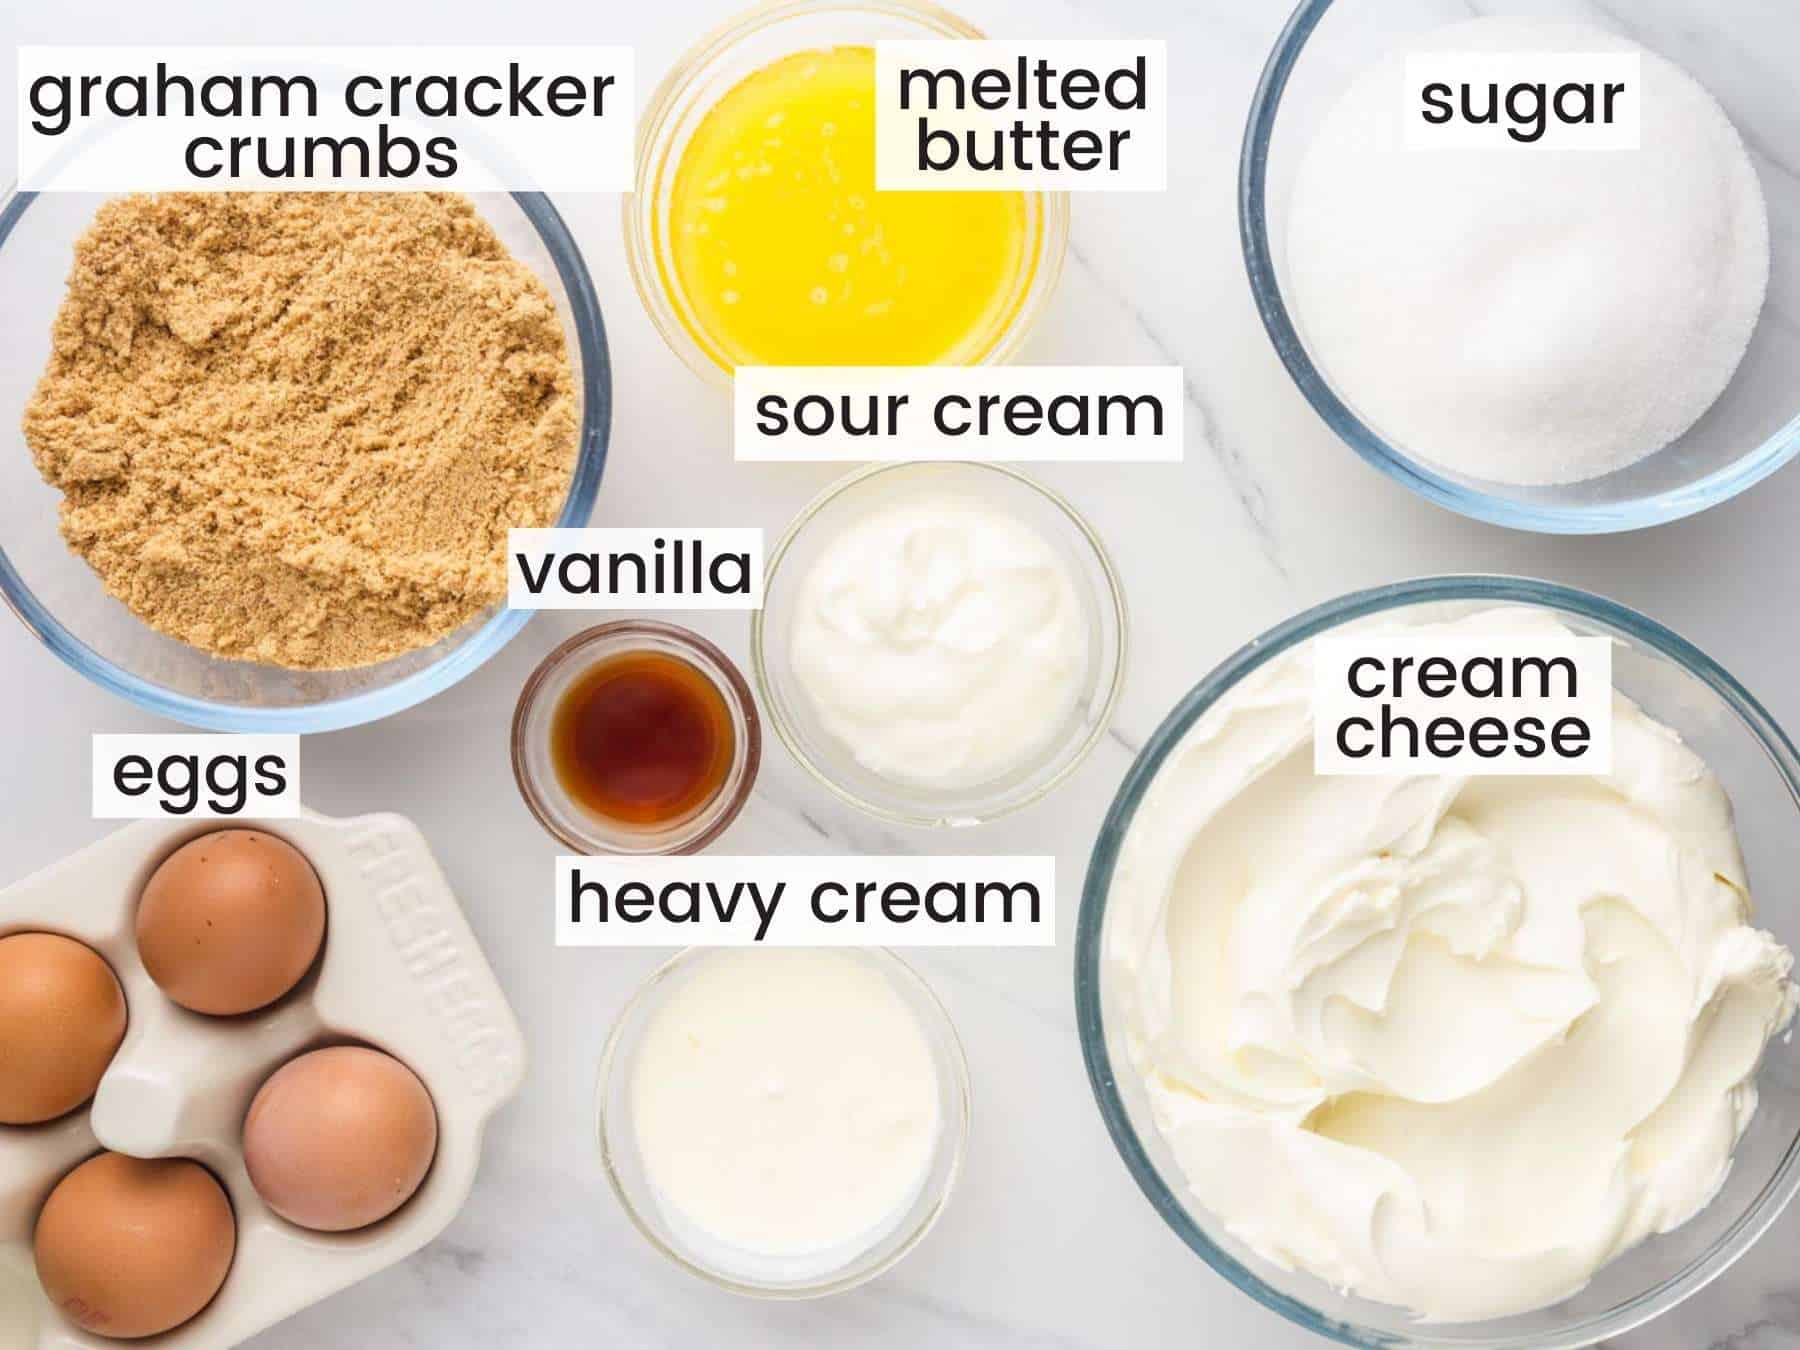 The ingredients needed to make a NY cheesecake from scratch, including cream cheese, sour cream and eggs. Measured into separate bowls, viewed from above. 